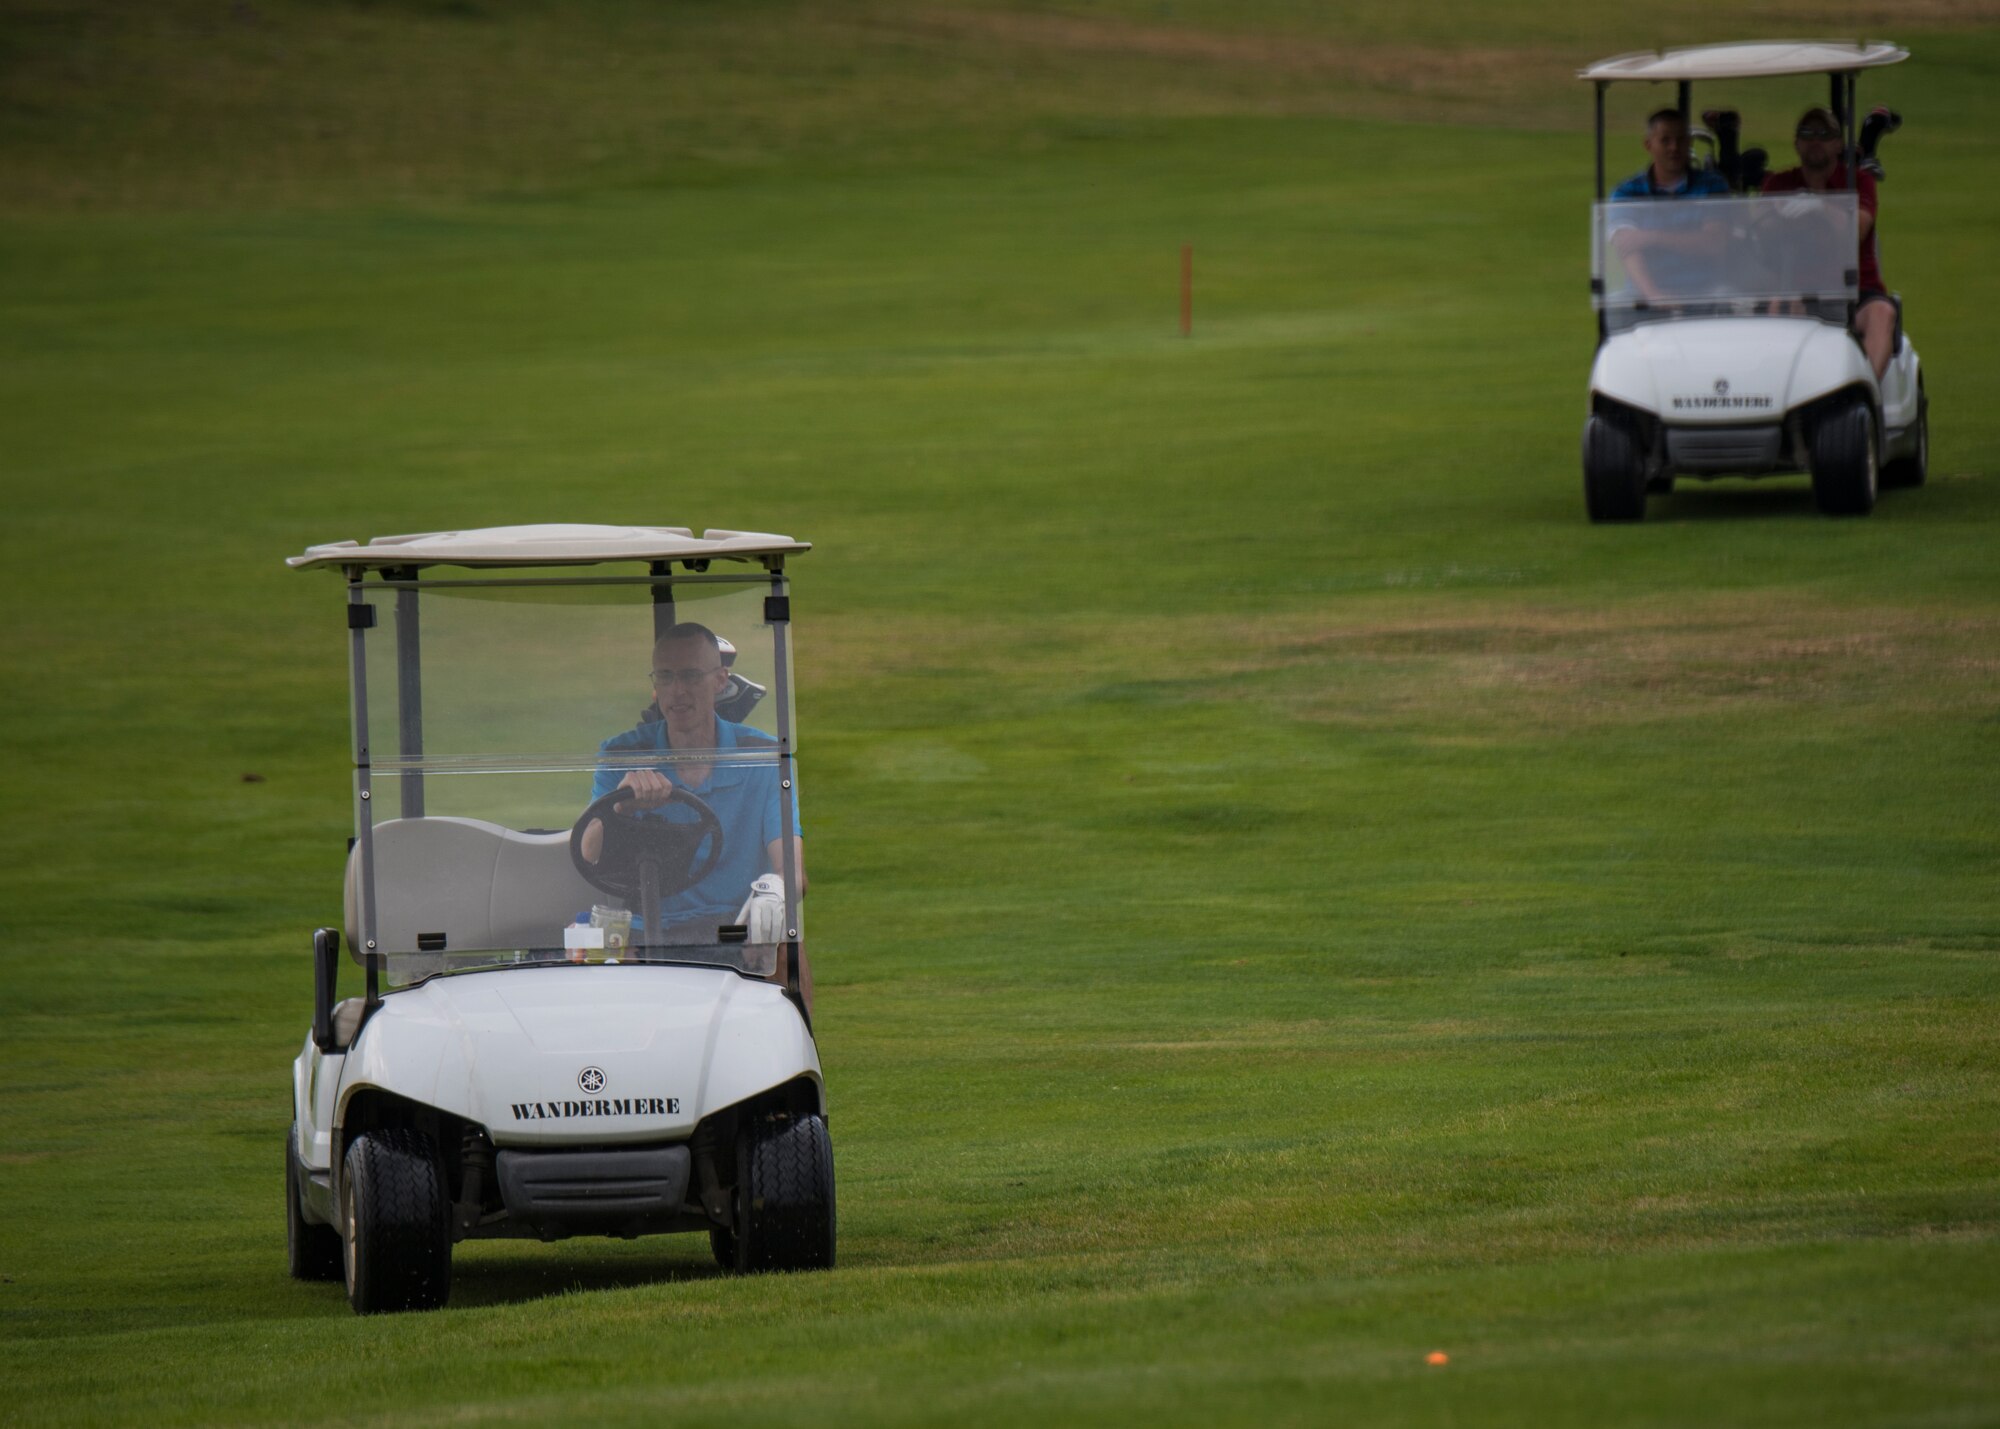 U.S. Air Force Chief Master Sgt. Lee Mills, 92nd Air Refueling Wing command chief, leads his team to the next golf hole during the 24th Annual Operation Warmheart Golf Tournament at Wandermere Golf Course in Spokane, Washington, July 27, 2018. Fairchild Airmen participated in the tournament to raise money to provide goods and support for Airmen and their families when facing difficult times. (U.S. Air Force photo/ Airman 1st Class Whitney Laine)